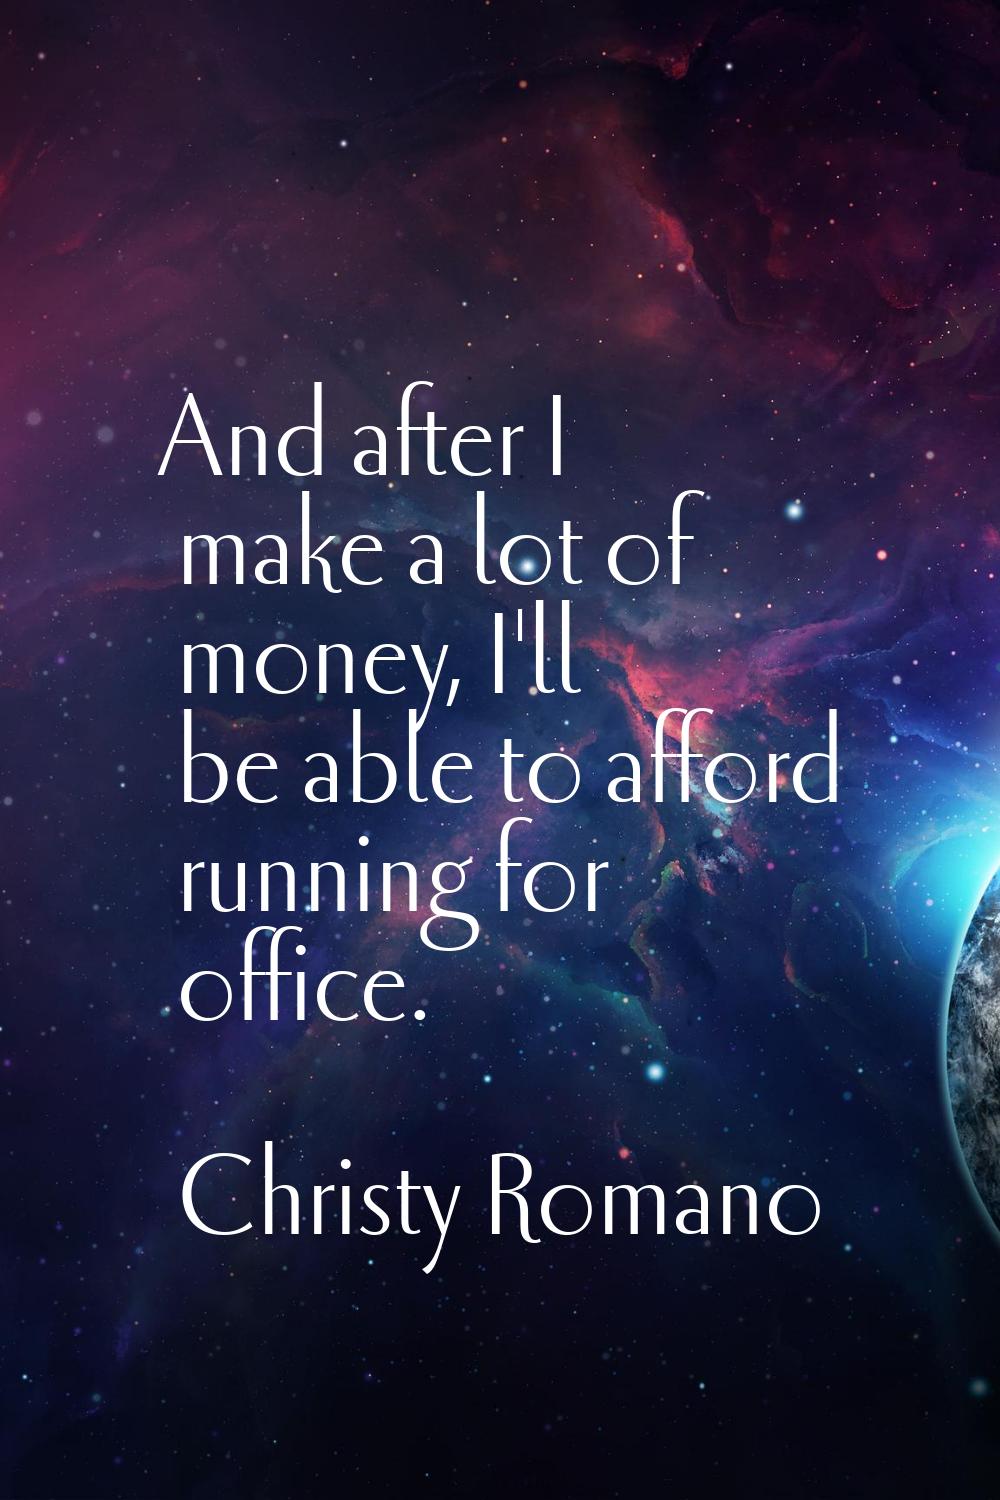 And after I make a lot of money, I'll be able to afford running for office.